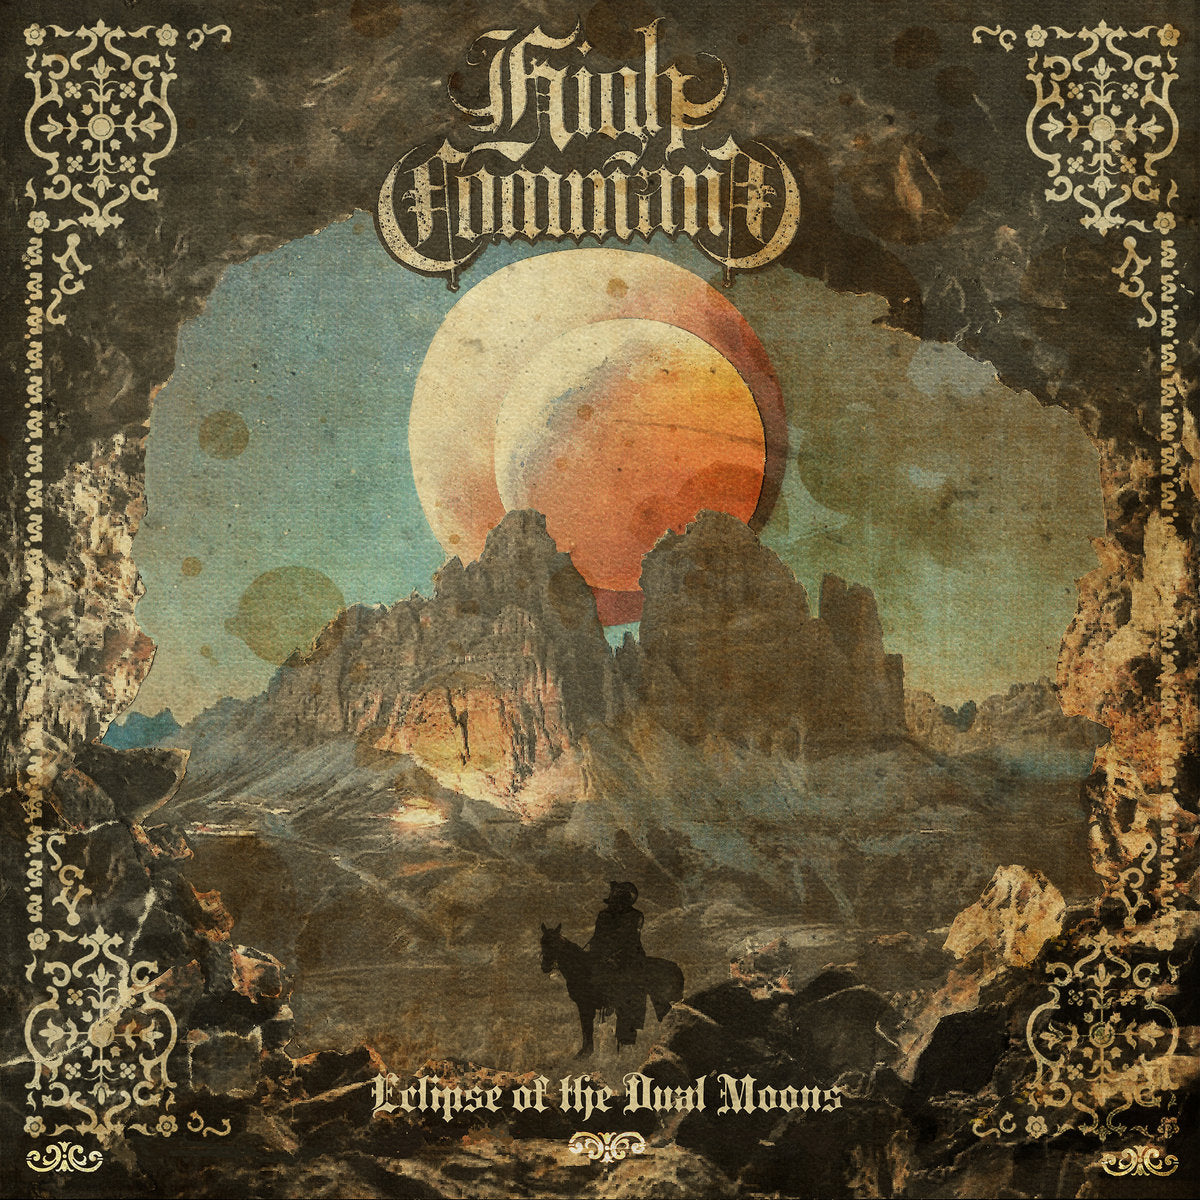 HIGH COMMAND "Eclipse Of The Dual Moons" LP